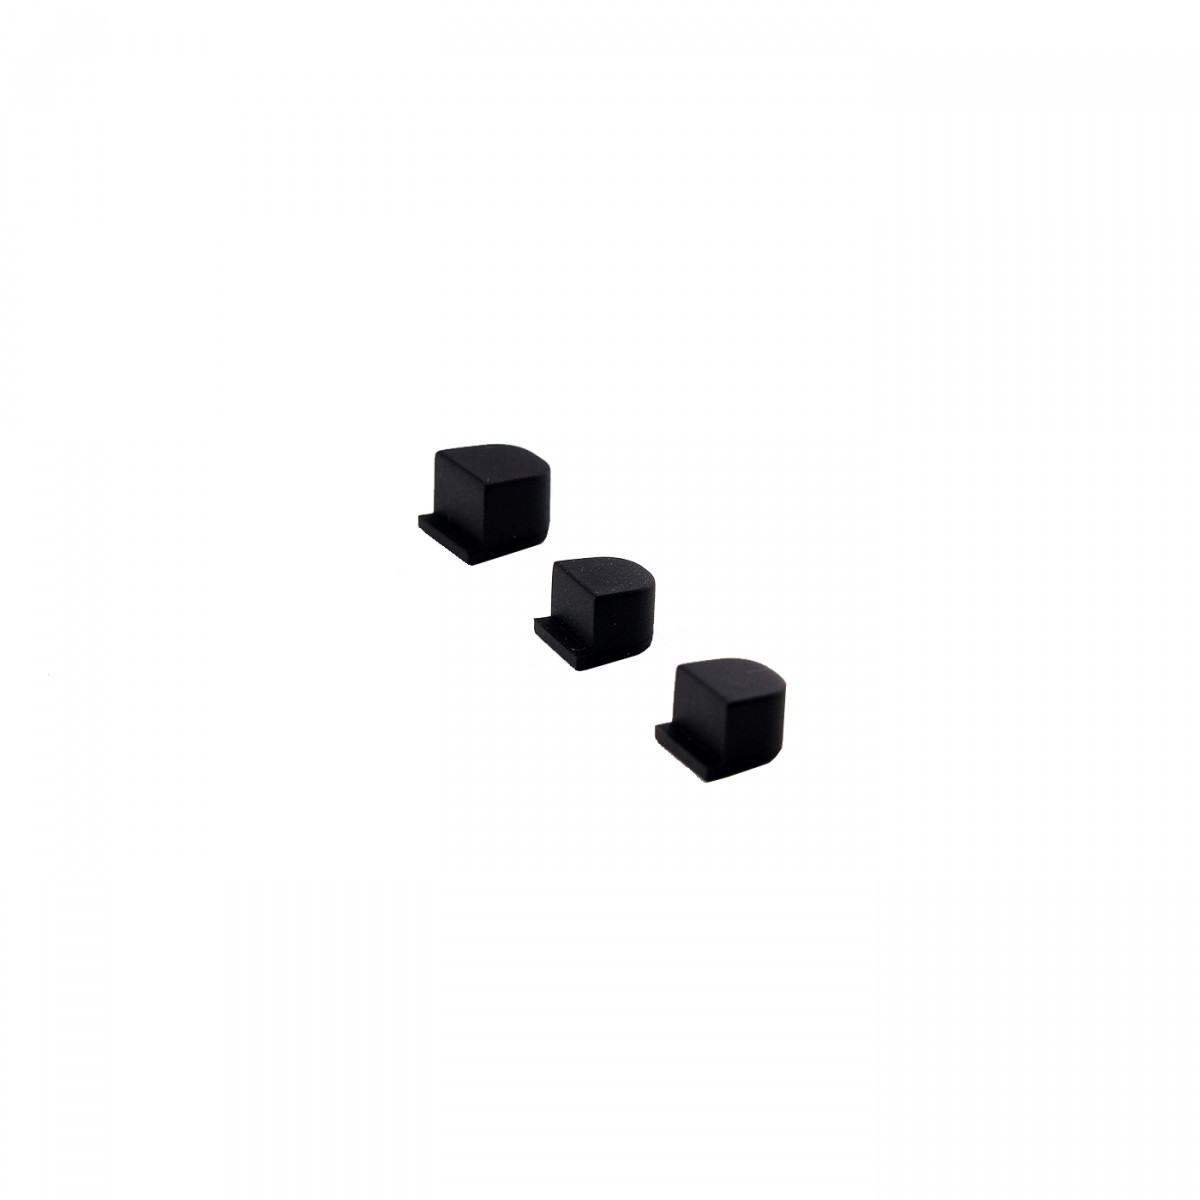 SEPURA set of 3 blanking plugs, 1x large, 2x small for SCC1/SCC3 300-00237